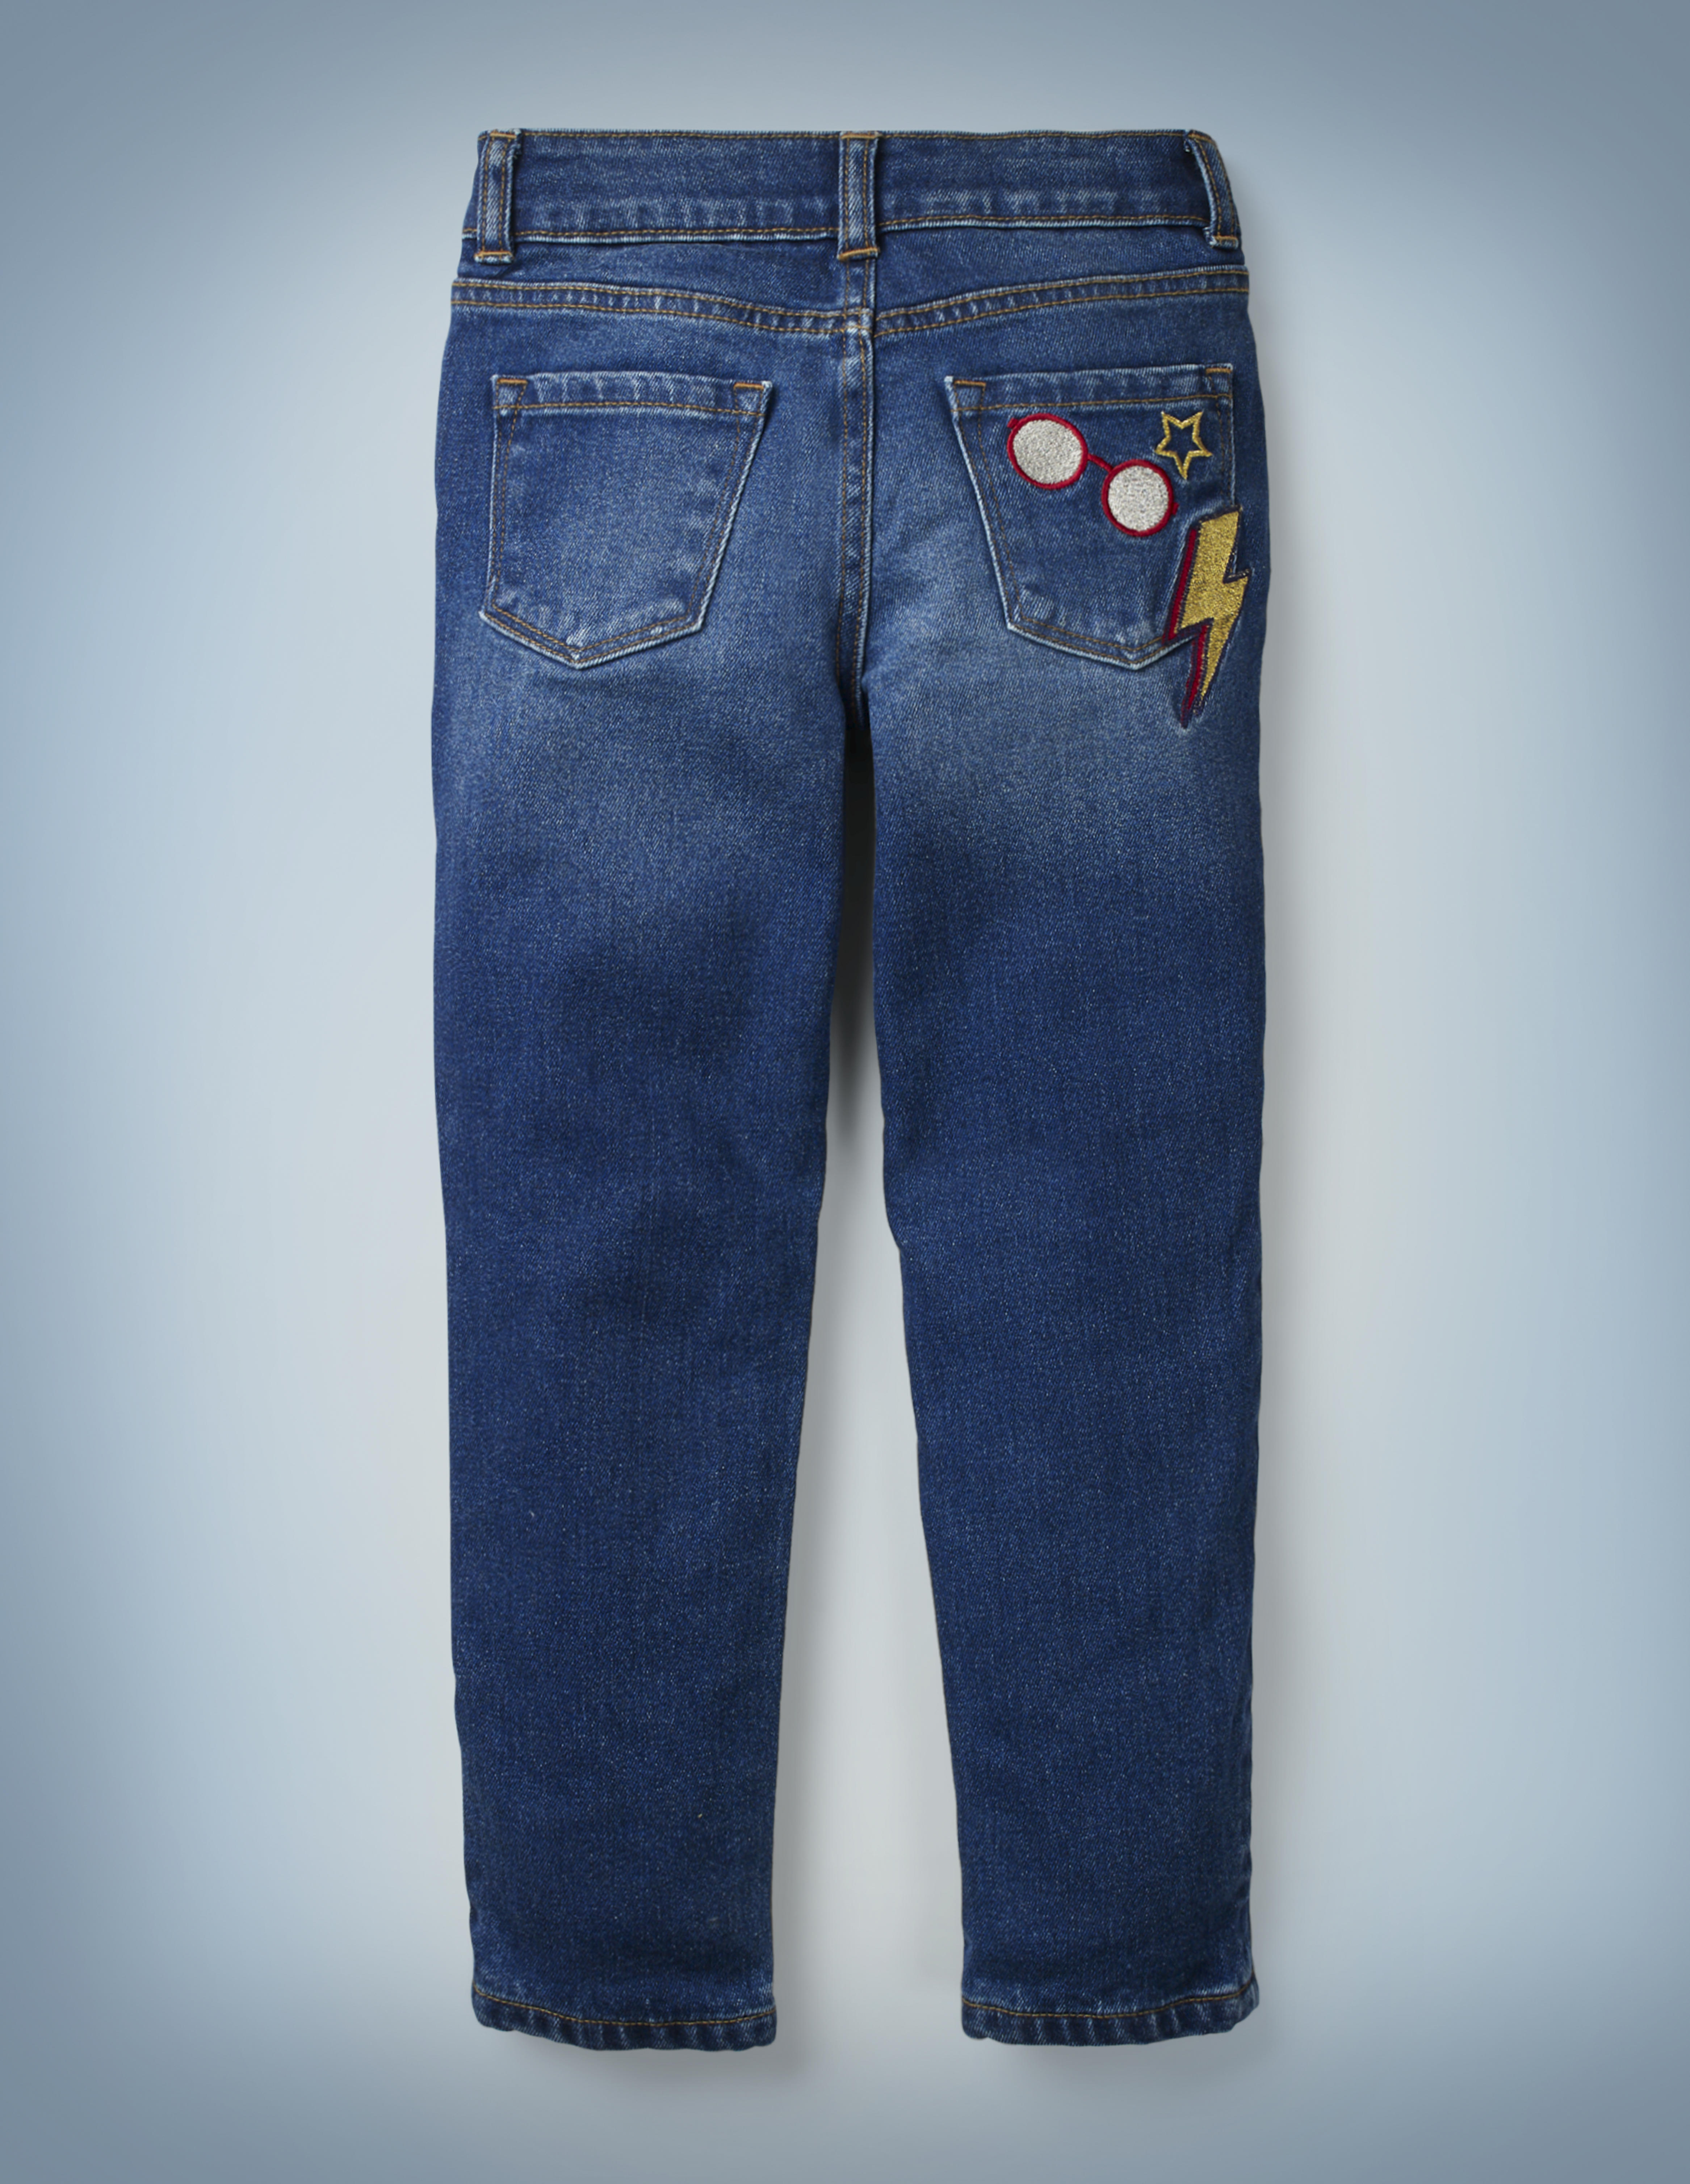 The Mini Boden Lightning Bolt Jeans include a fun design of Harry Potter’s glasses, a red-and-gold lightning bolt, and a star on the back right pocket. They retail for £28.